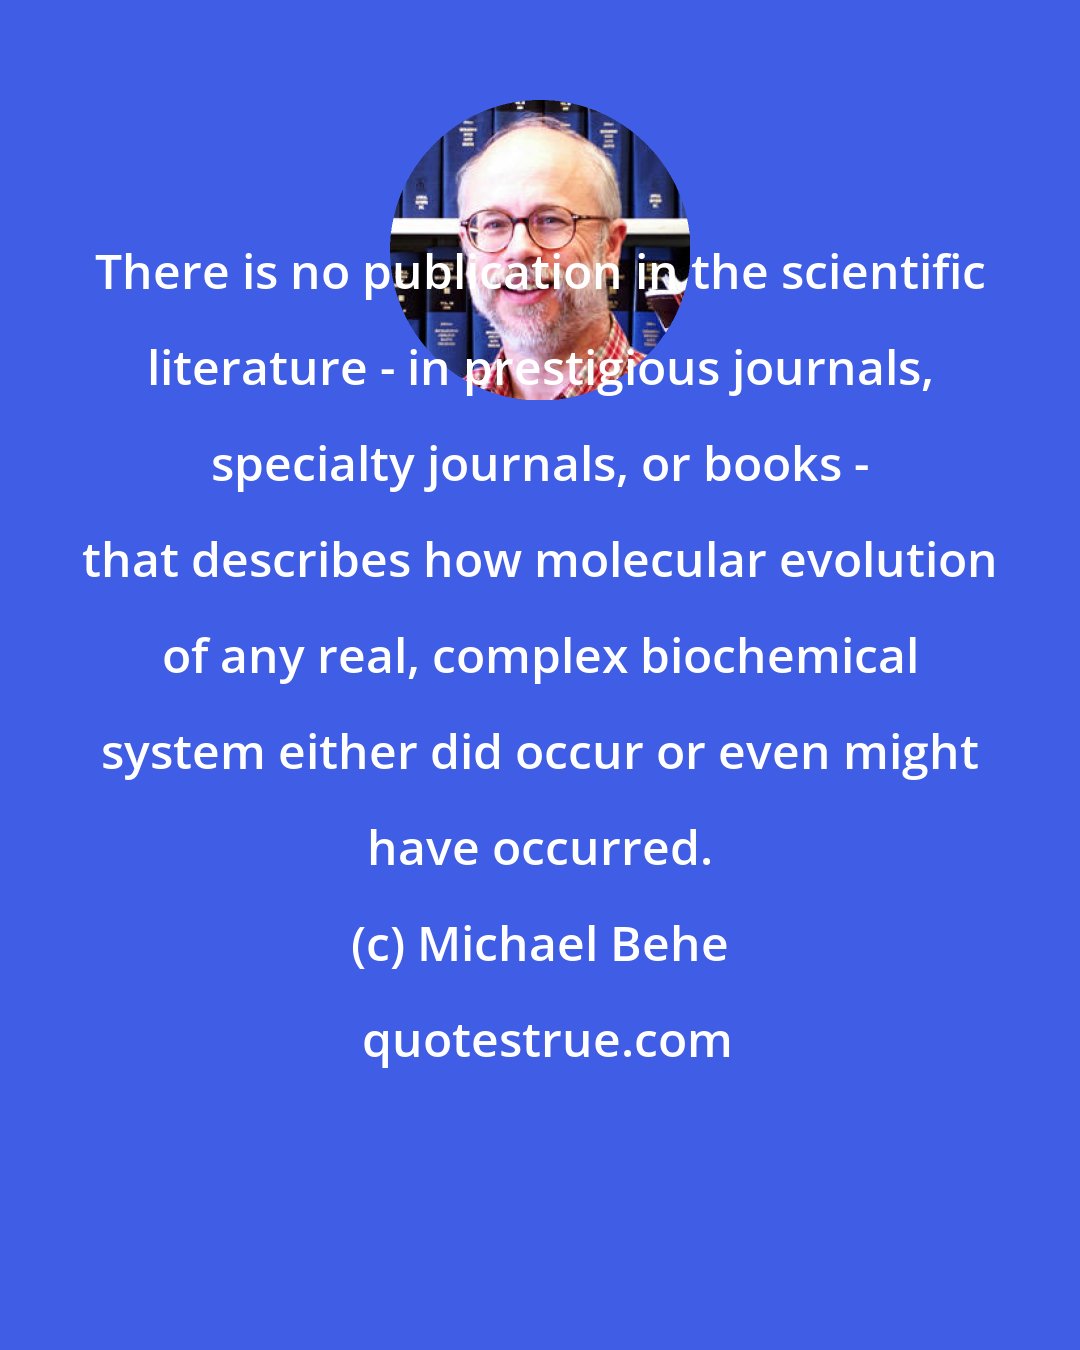 Michael Behe: There is no publication in the scientific literature - in prestigious journals, specialty journals, or books - that describes how molecular evolution of any real, complex biochemical system either did occur or even might have occurred.